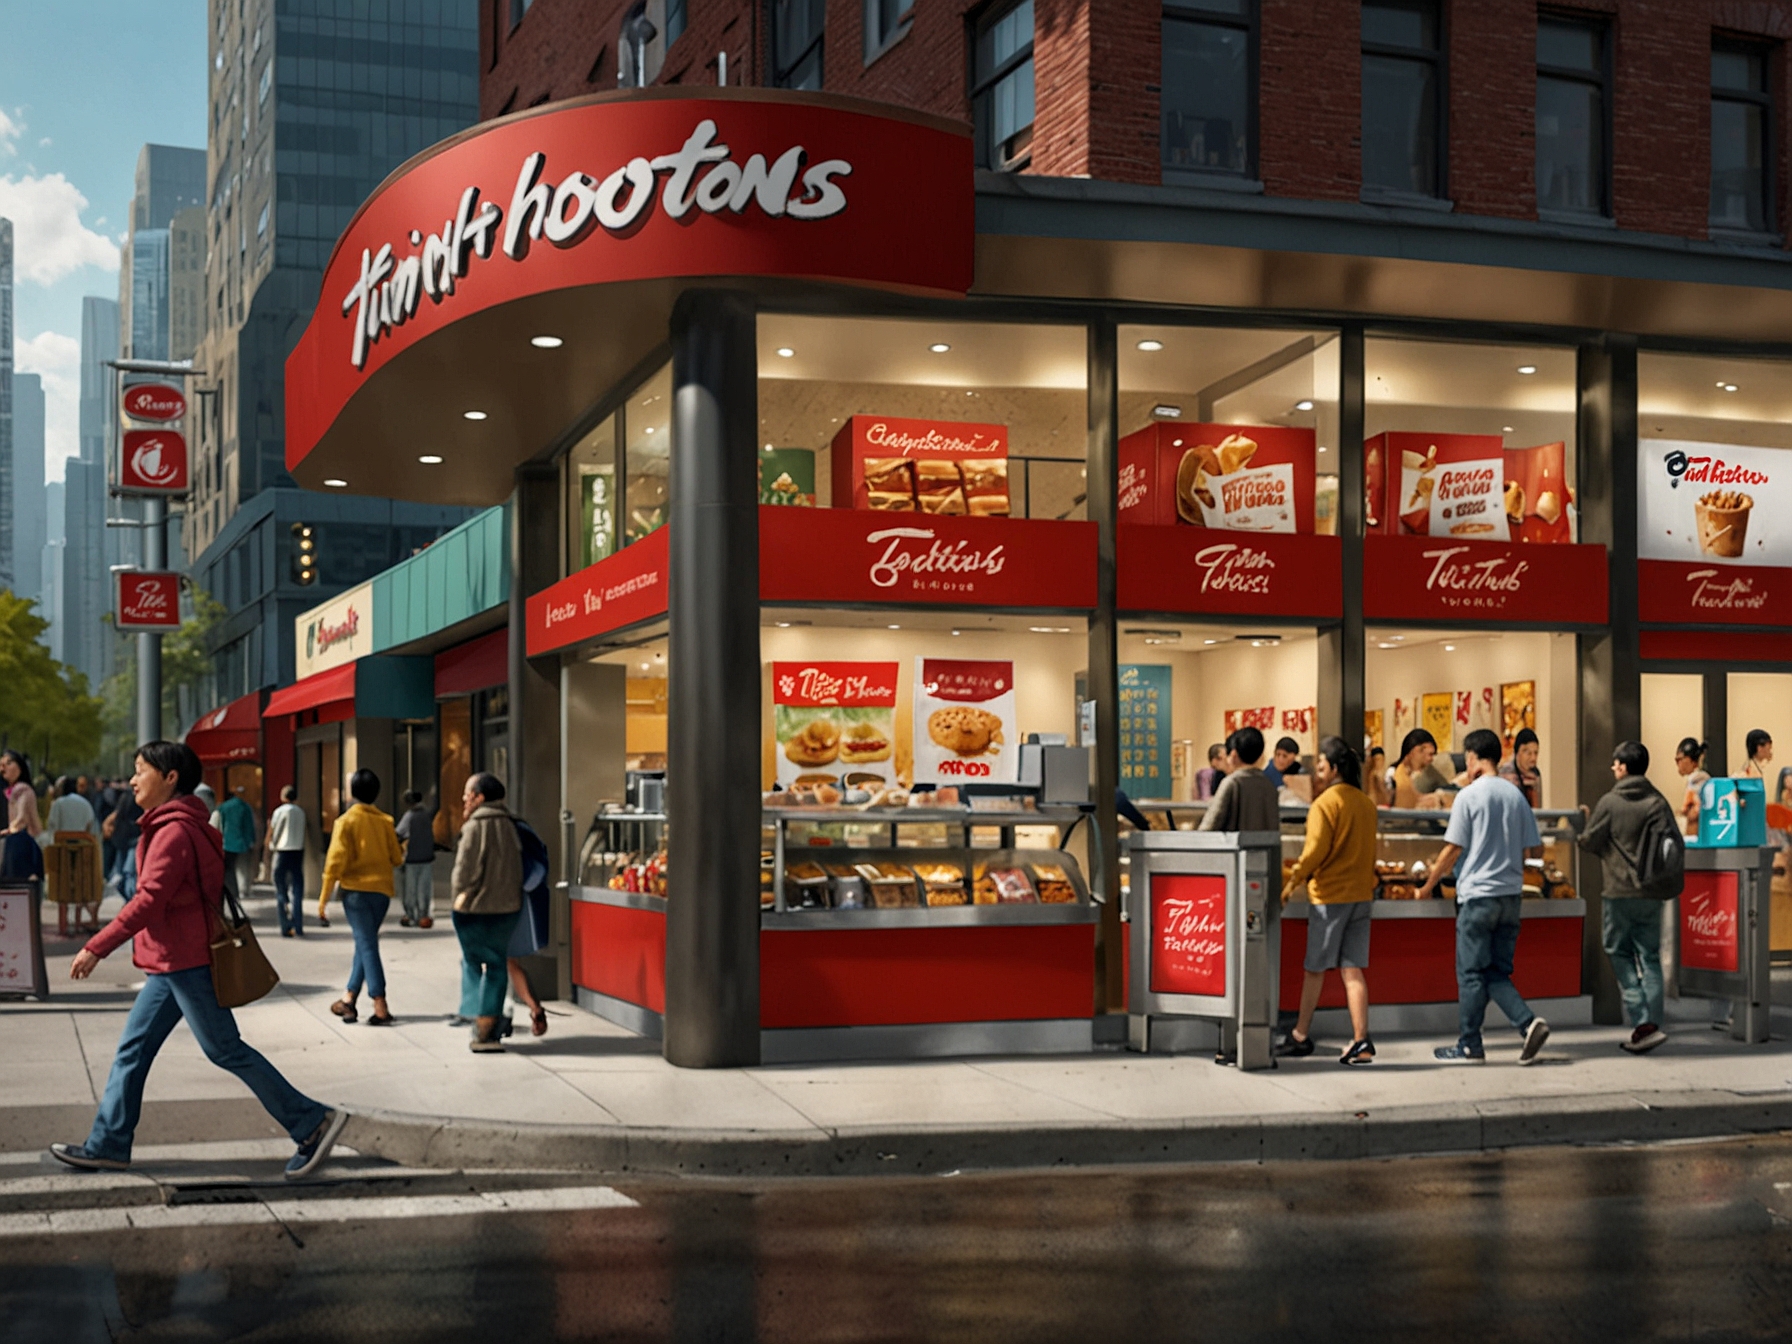 An illustration of Tim Hortons' new store openings in major Chinese cities, highlighting the partnership with Cartesian Capital Group for market expansion and local adaptation.